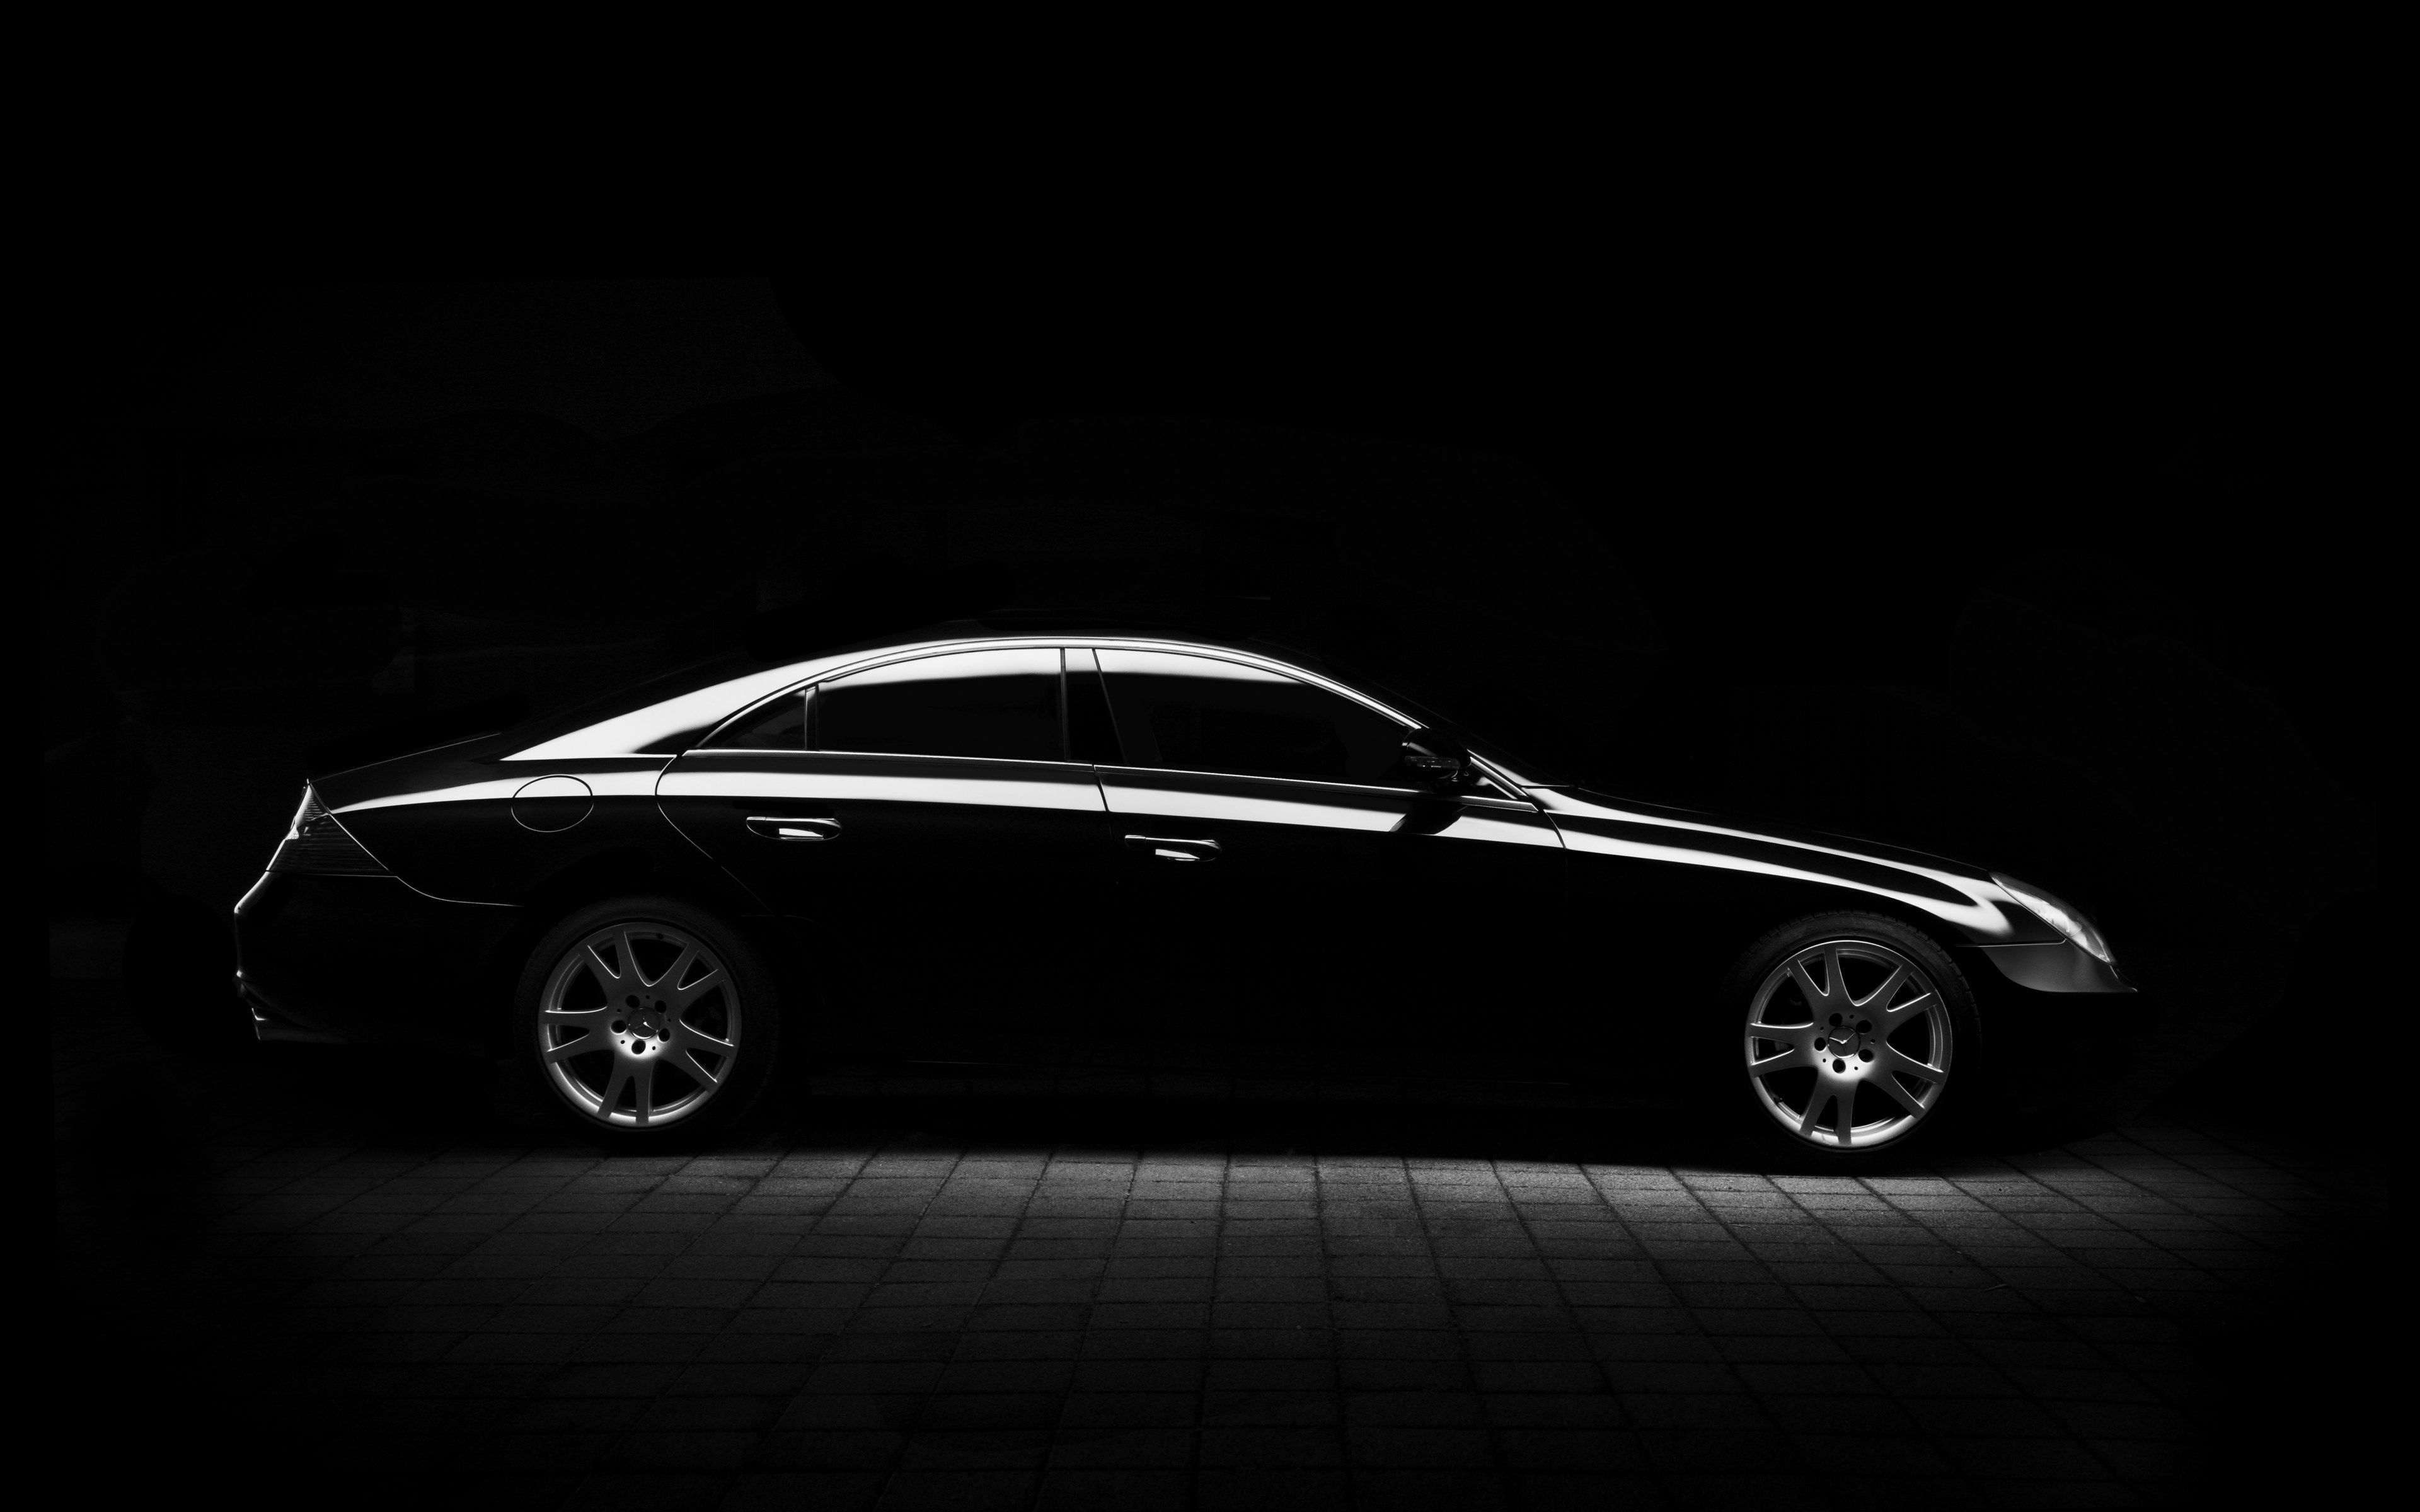 Wallpaper / black and white shot of black mercedes benz saloon car on pavement at night, mercedes minimal silhouette 4k wallpaper